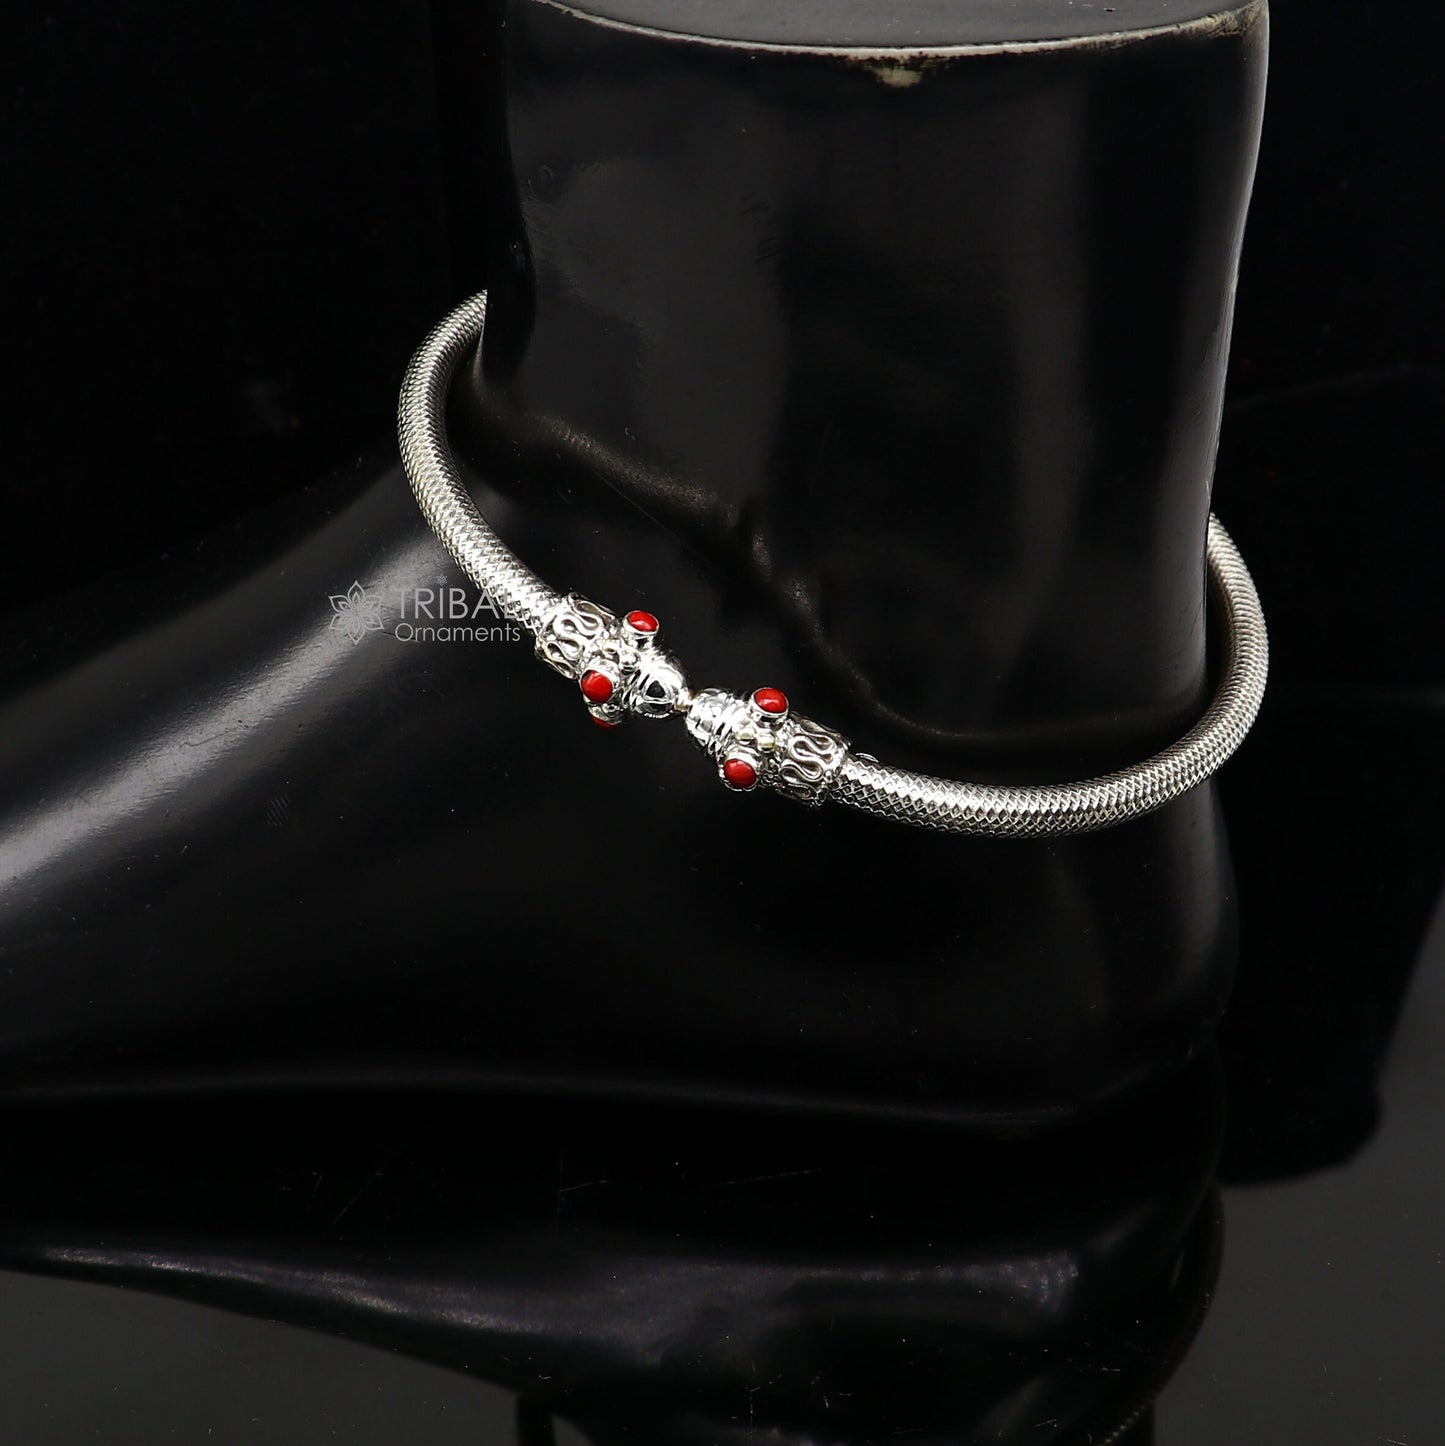 Trendy cultural 925 sterling silver handmade fabulous foot anklet kada/anklet amazing red coral stone tribal ethnic jewelry india nsfk106 - TRIBAL ORNAMENTS